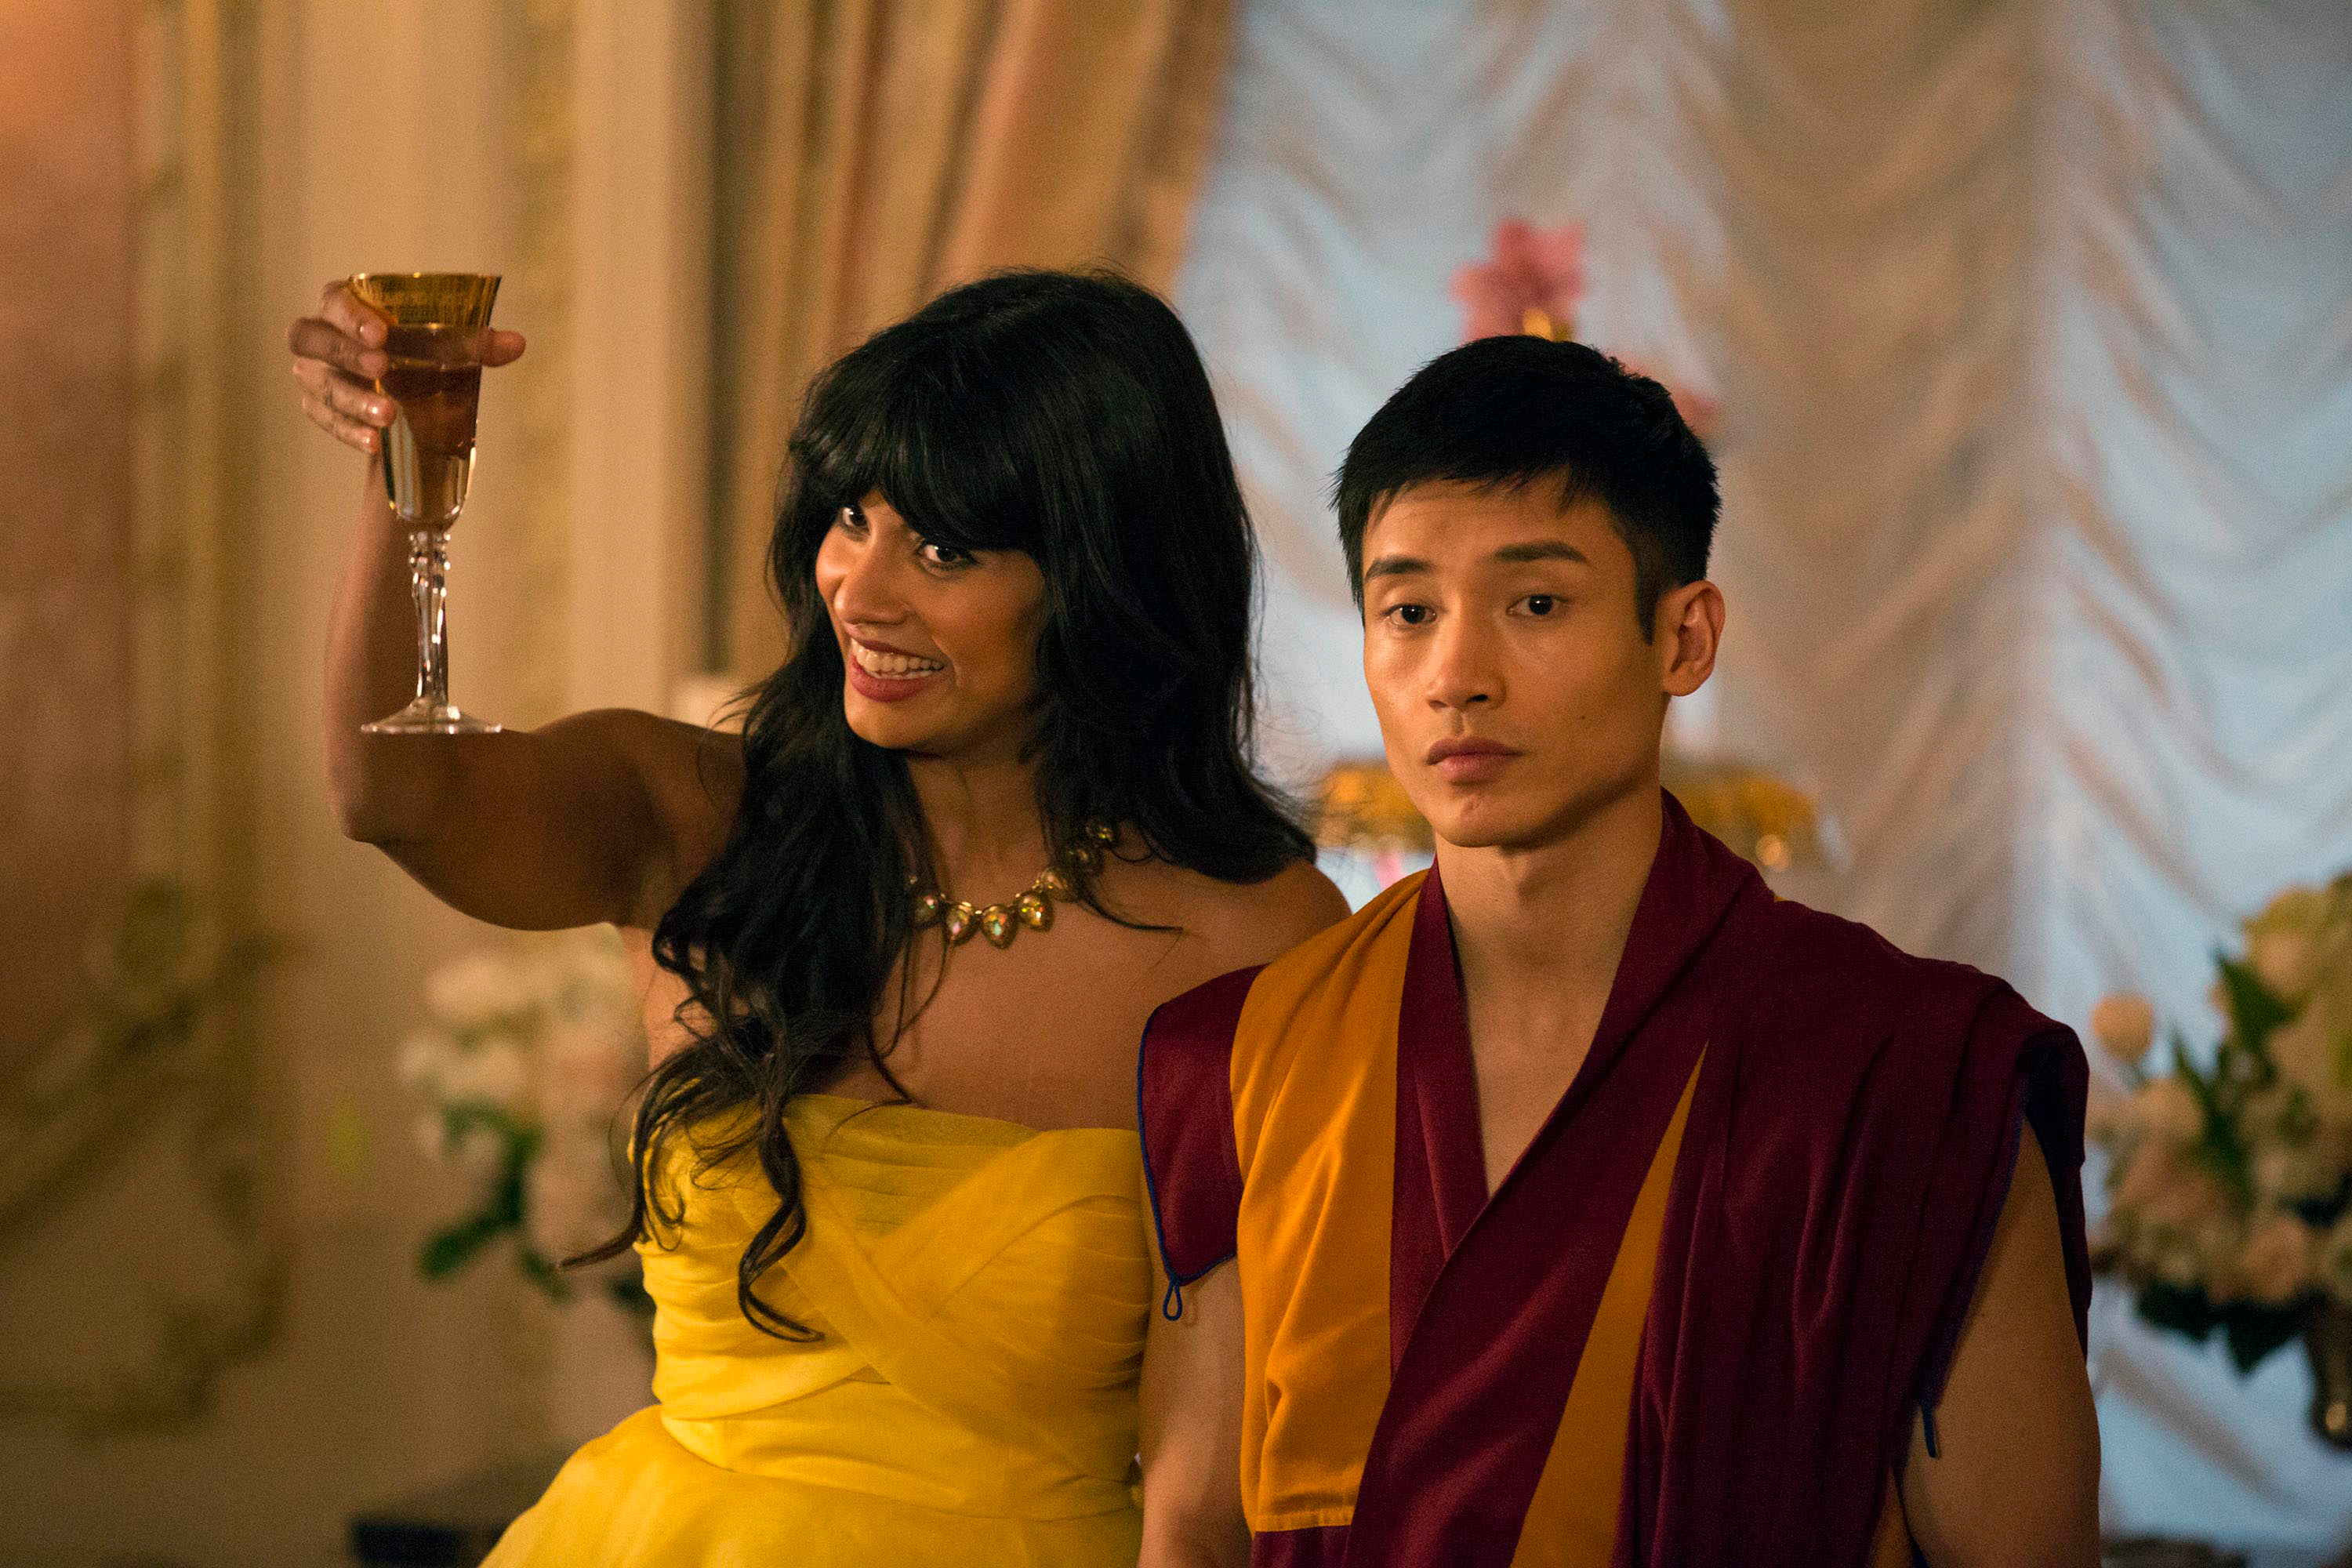 Two characters from TV show, woman in yellow dress with a glass, man in monk robes, indoors